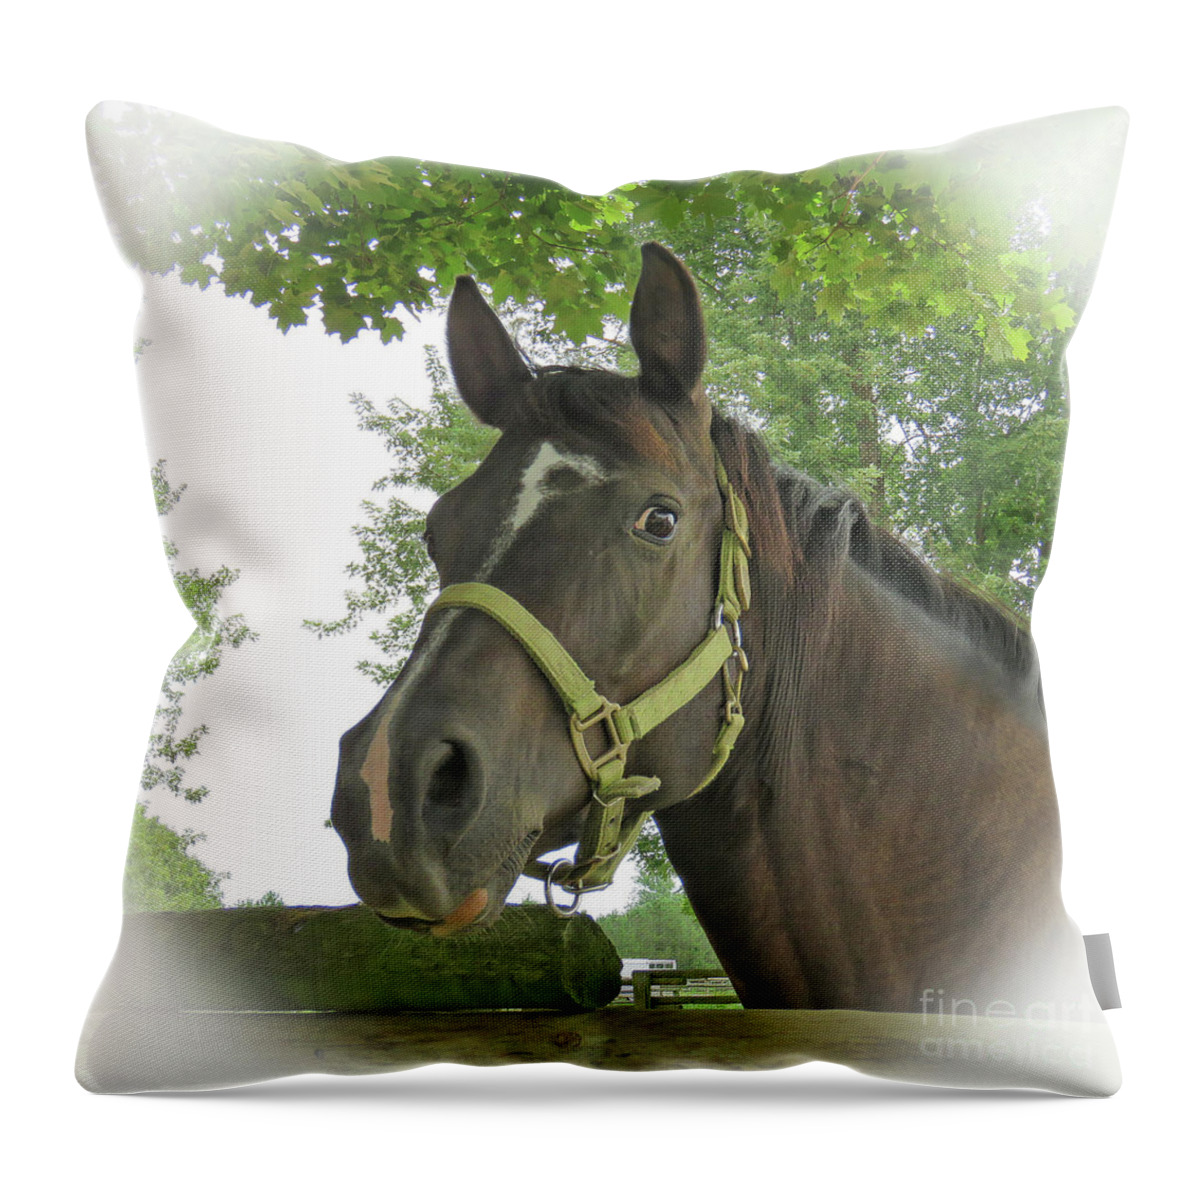 Horse Throw Pillow featuring the digital art Watchful Mare by Sharon Weiss